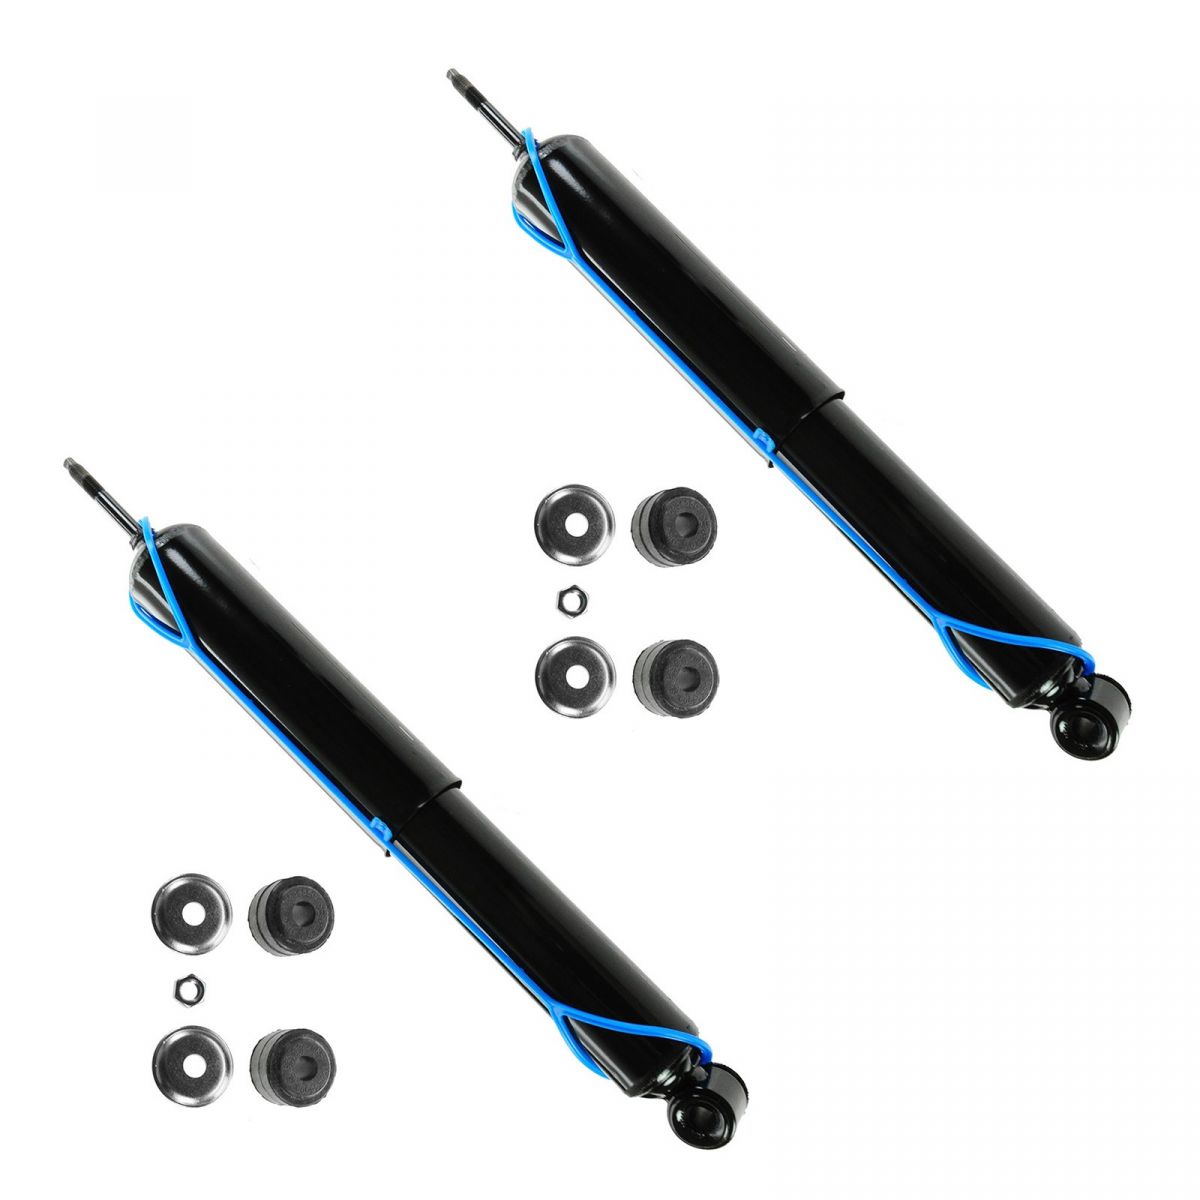 Monroe Shock Absorber Rear Pair Set for 00-06 Toyota Tundra 2WD | eBay